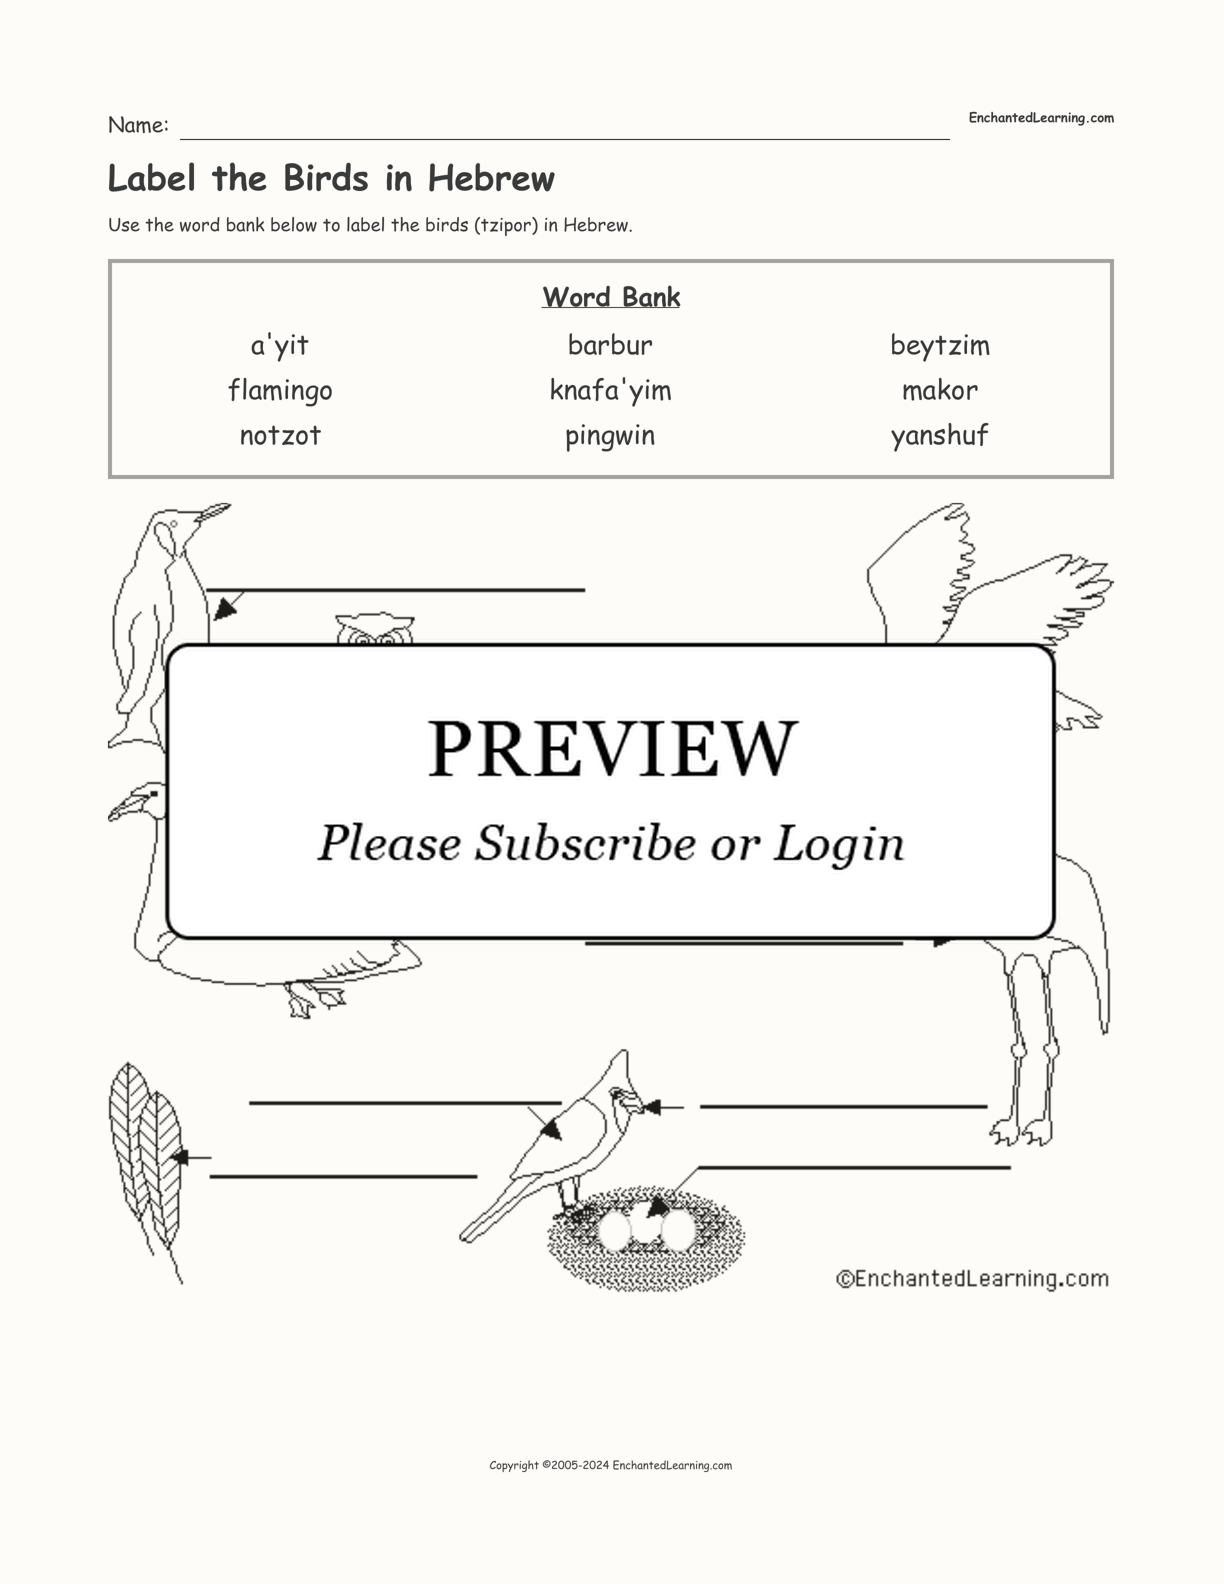 Label the Birds in Hebrew interactive worksheet page 1